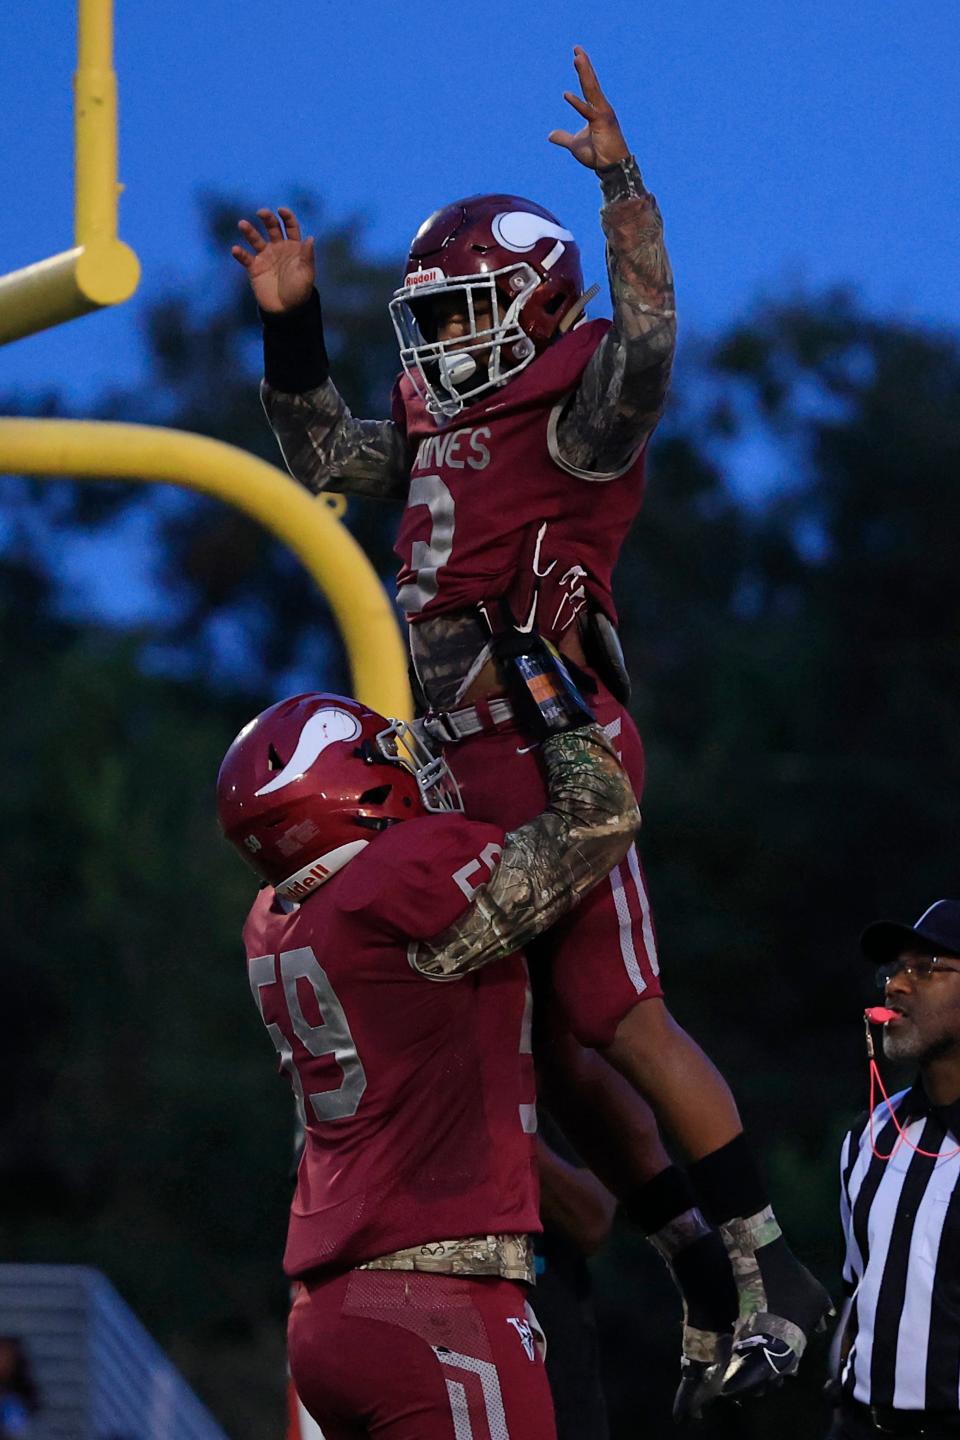 Raines' Mark Miller (3) is celebrated after his touchdown score by Antonio Allen (59) during the second quarter of a high school football matchup Friday, Oct. 6, 2023 at Raines High School in Jacksonville, Fla. The Raines Vikings edged the First Coast Buccaneers 27-26. [Corey Perrine/Florida Times-Union]